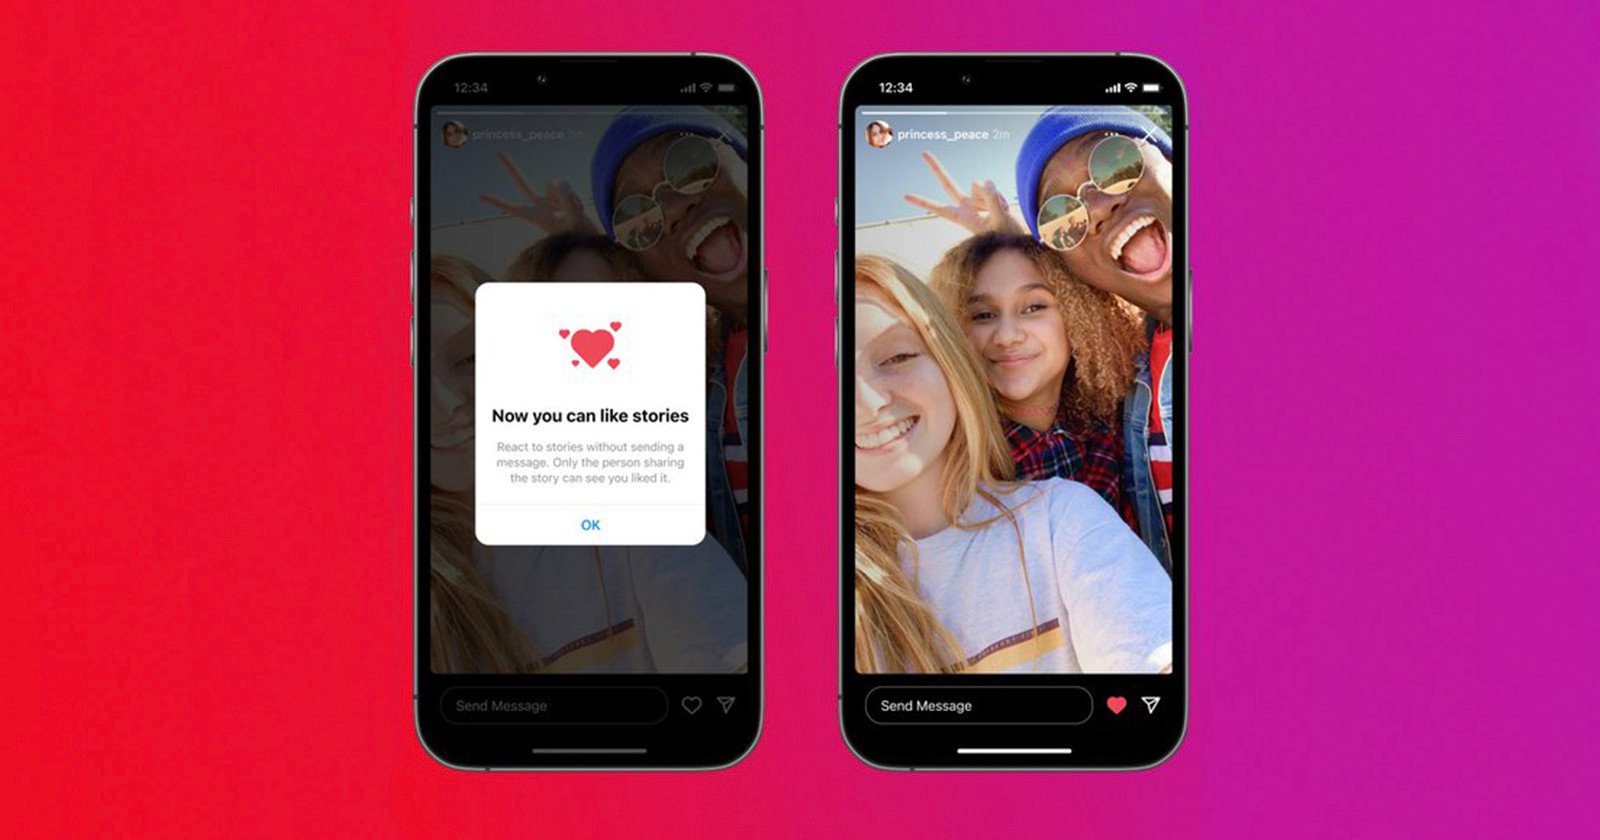 Instagram Adds Private Likes for Stories to Help Clean Up DMs